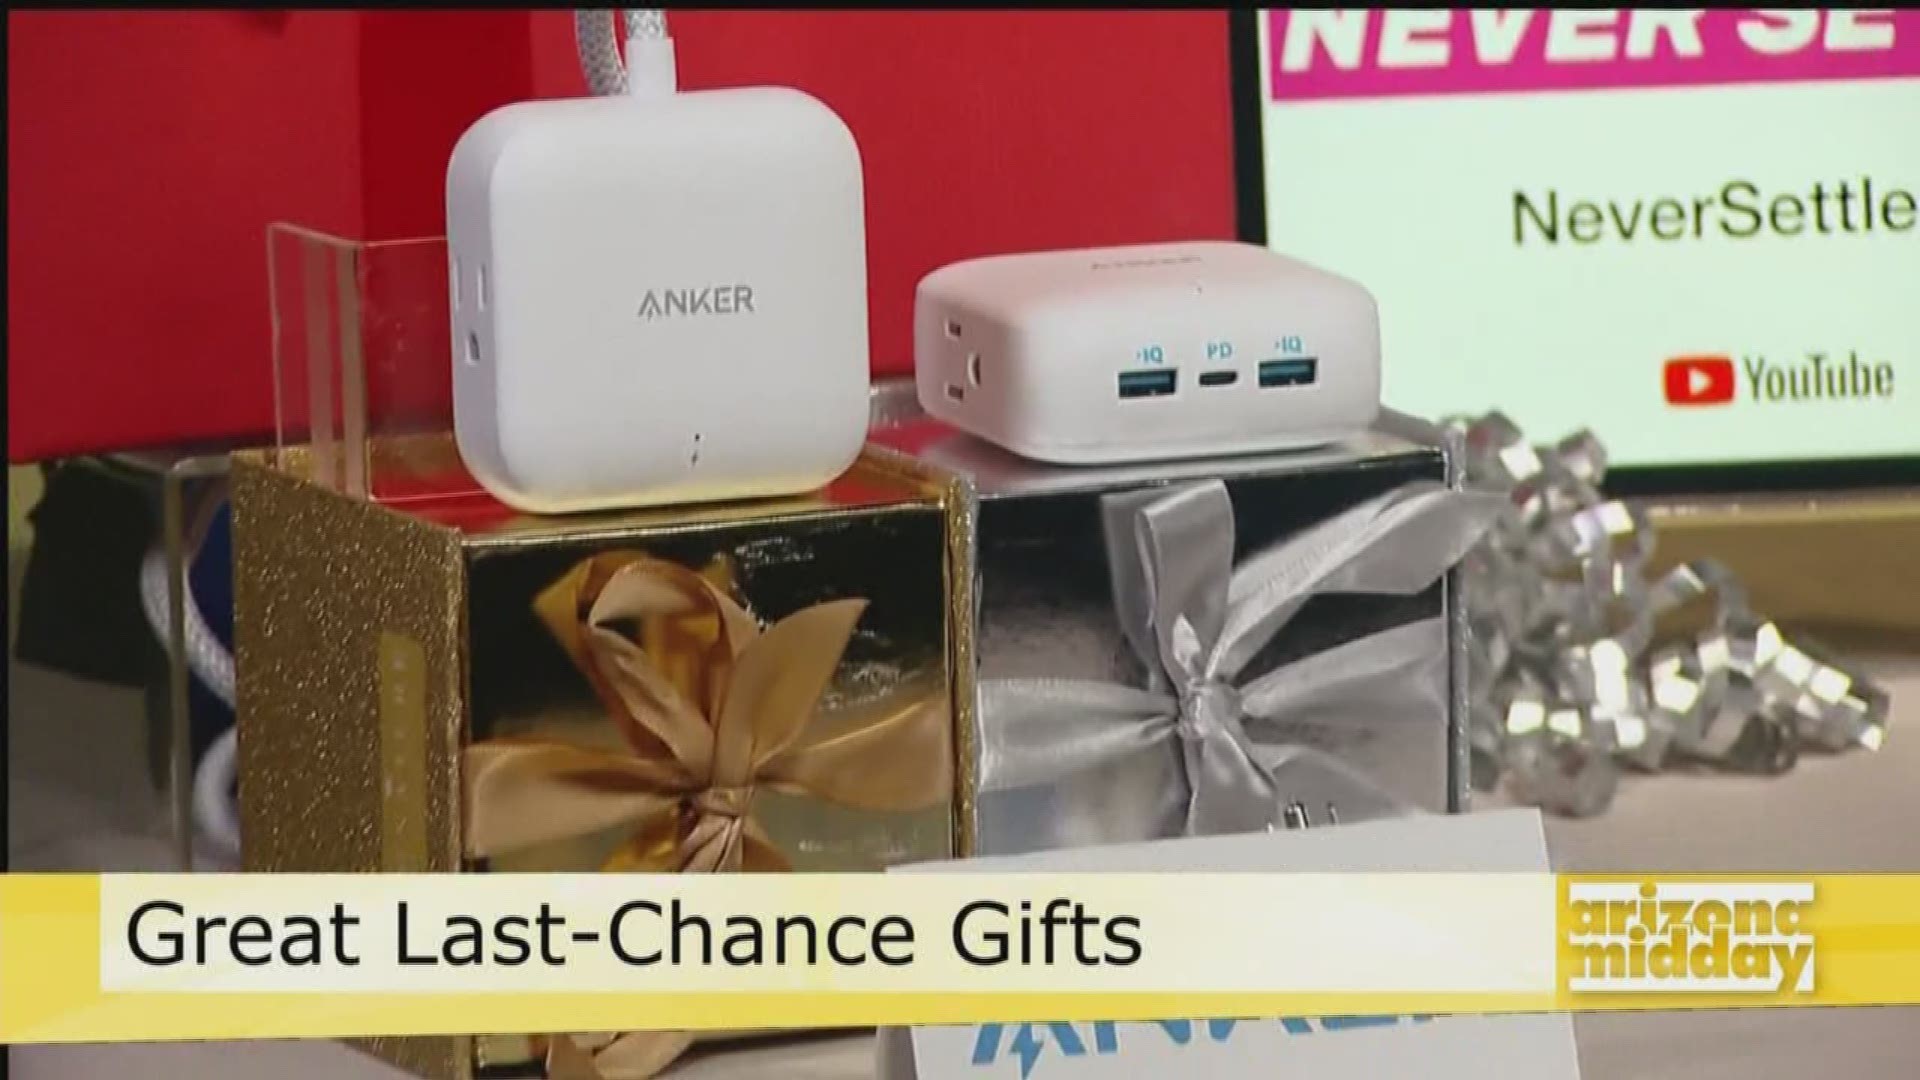 Tech and digital lifestyle expert Mario Armstrong gives us the scoop on great last-minute gifts for the holidays!